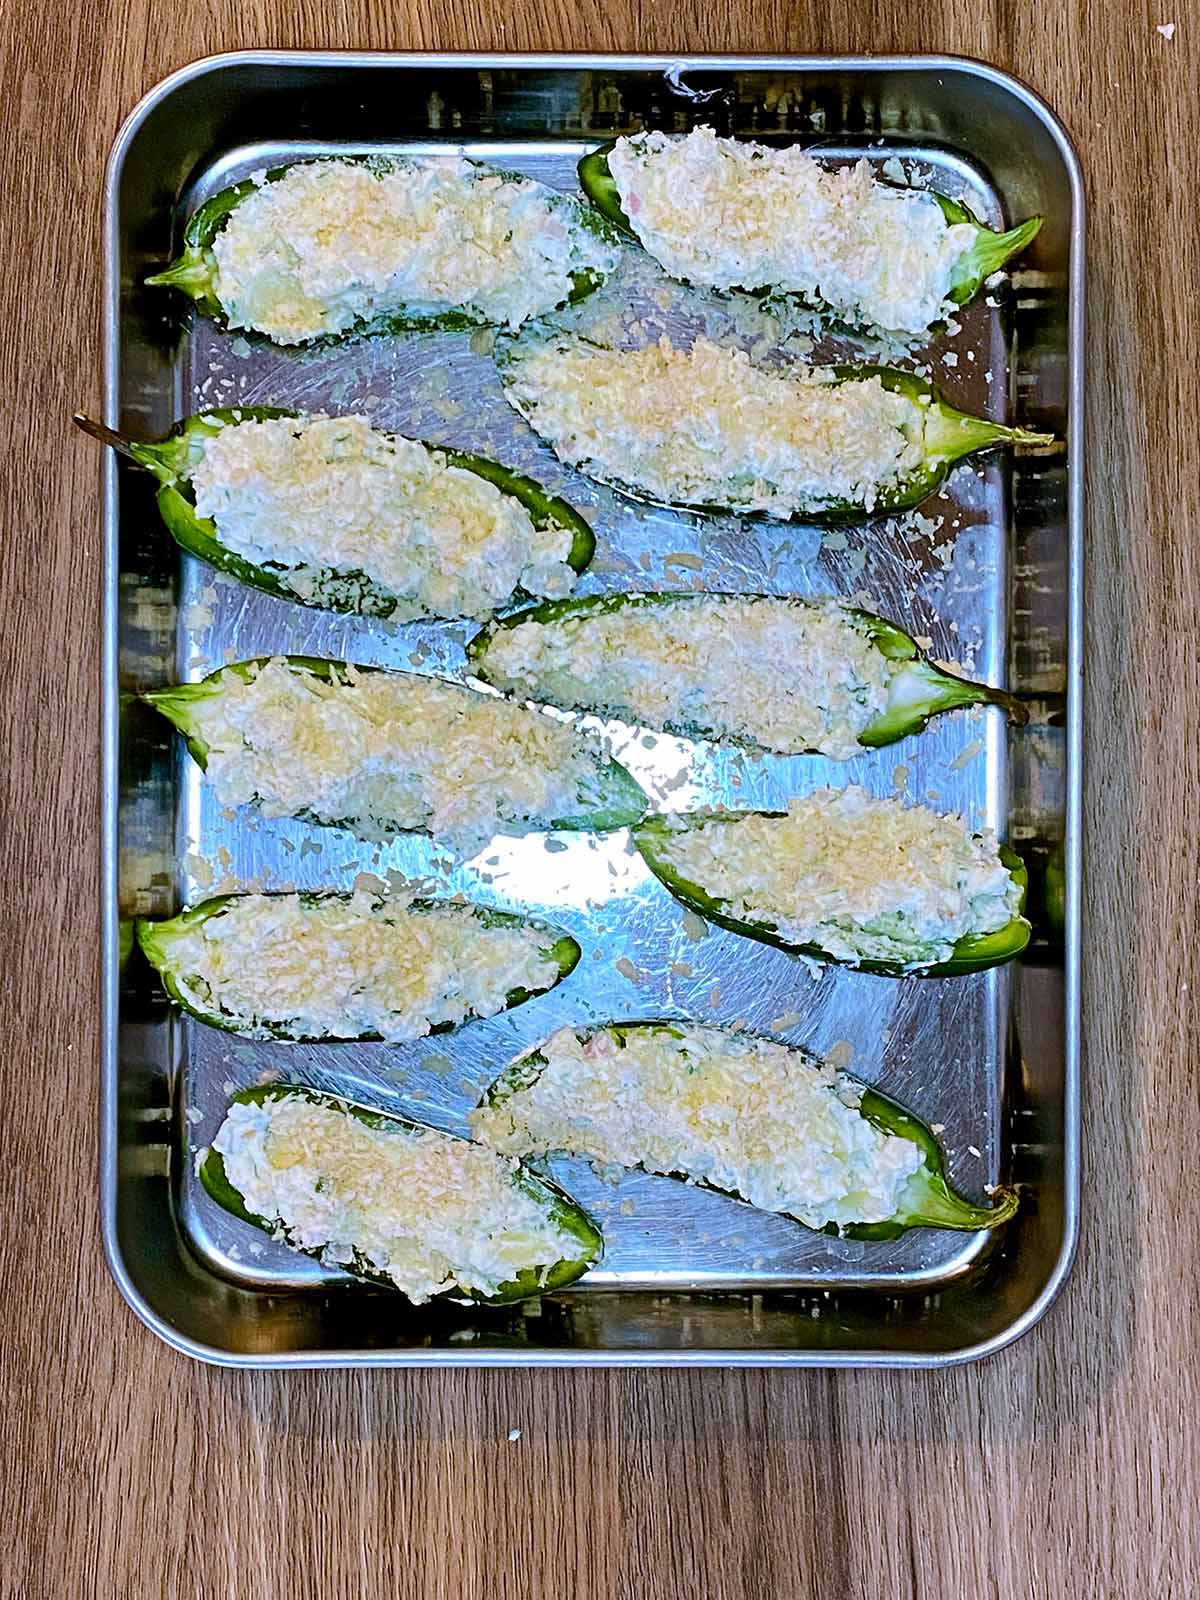 The stuffed jalapenos on a baking tray.